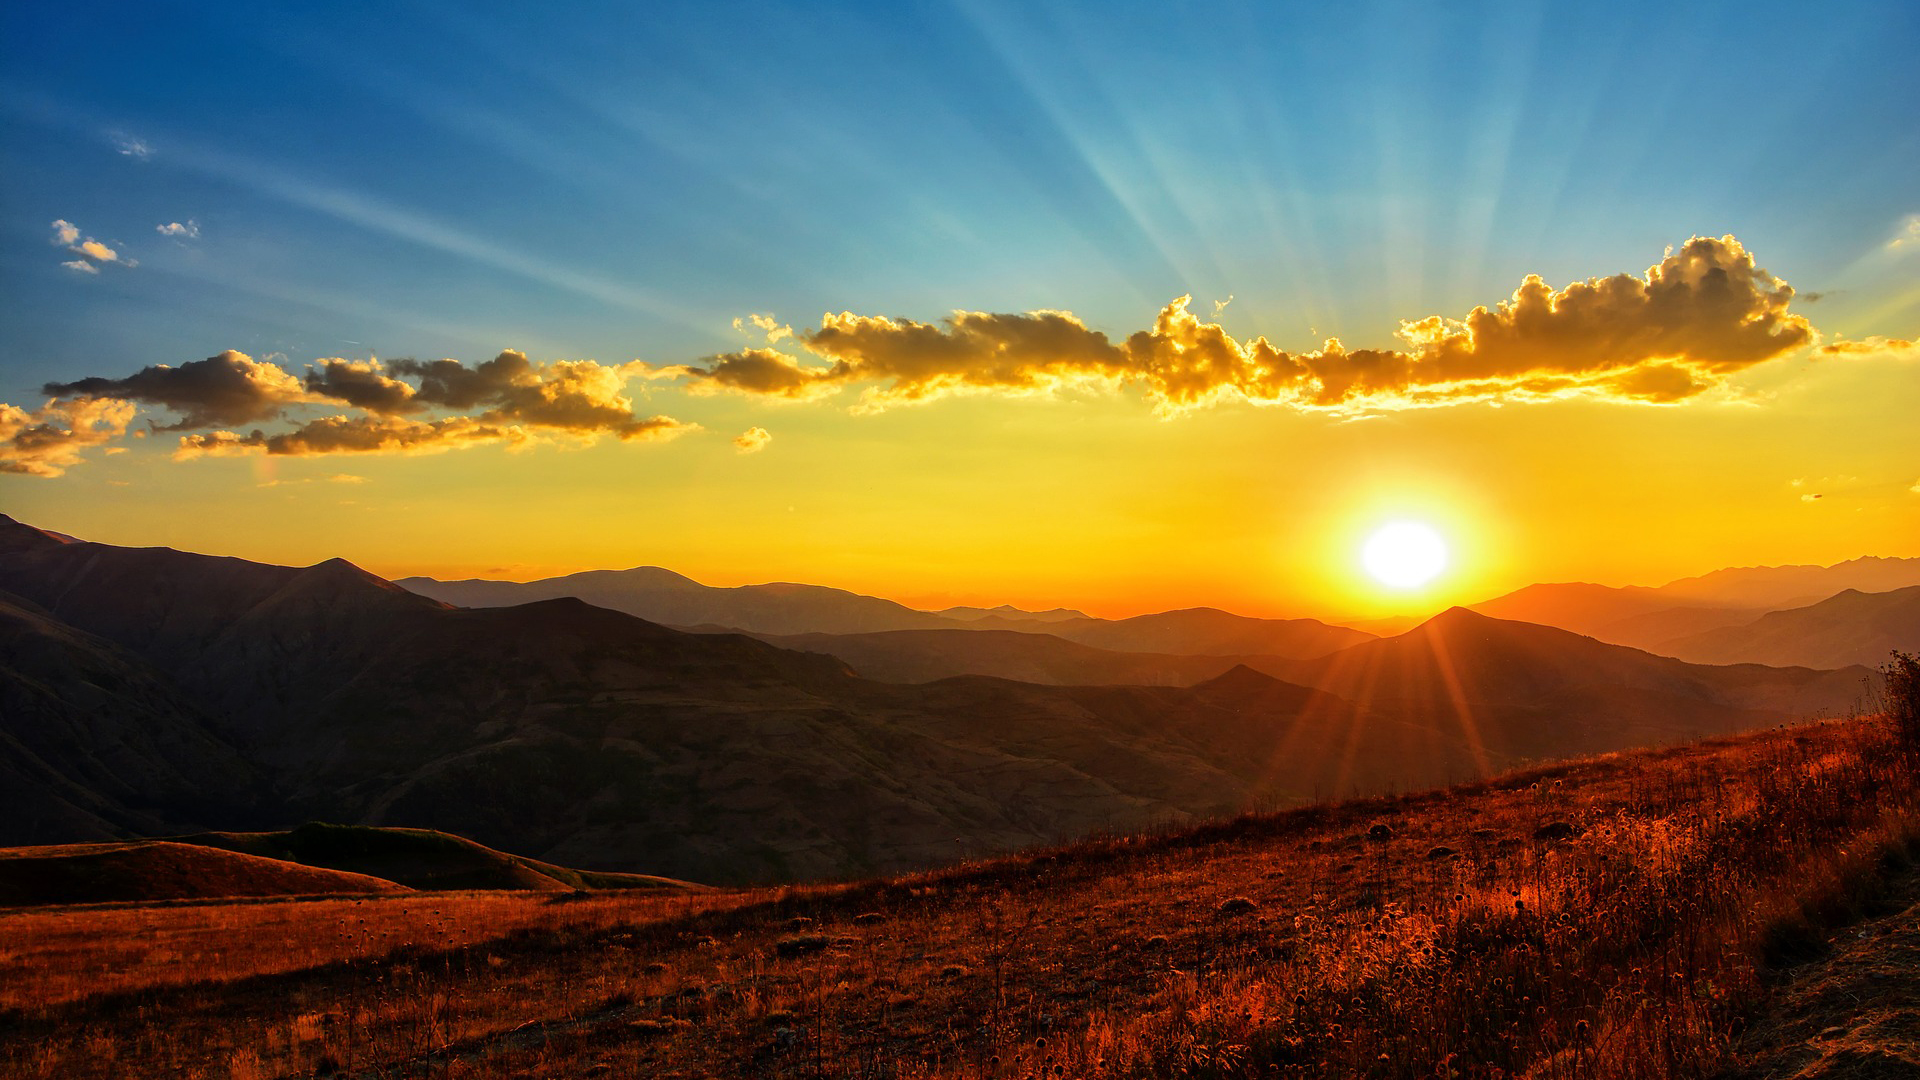 Landscape View Of Mountains In Sunrays Wallpaper 2K Nature